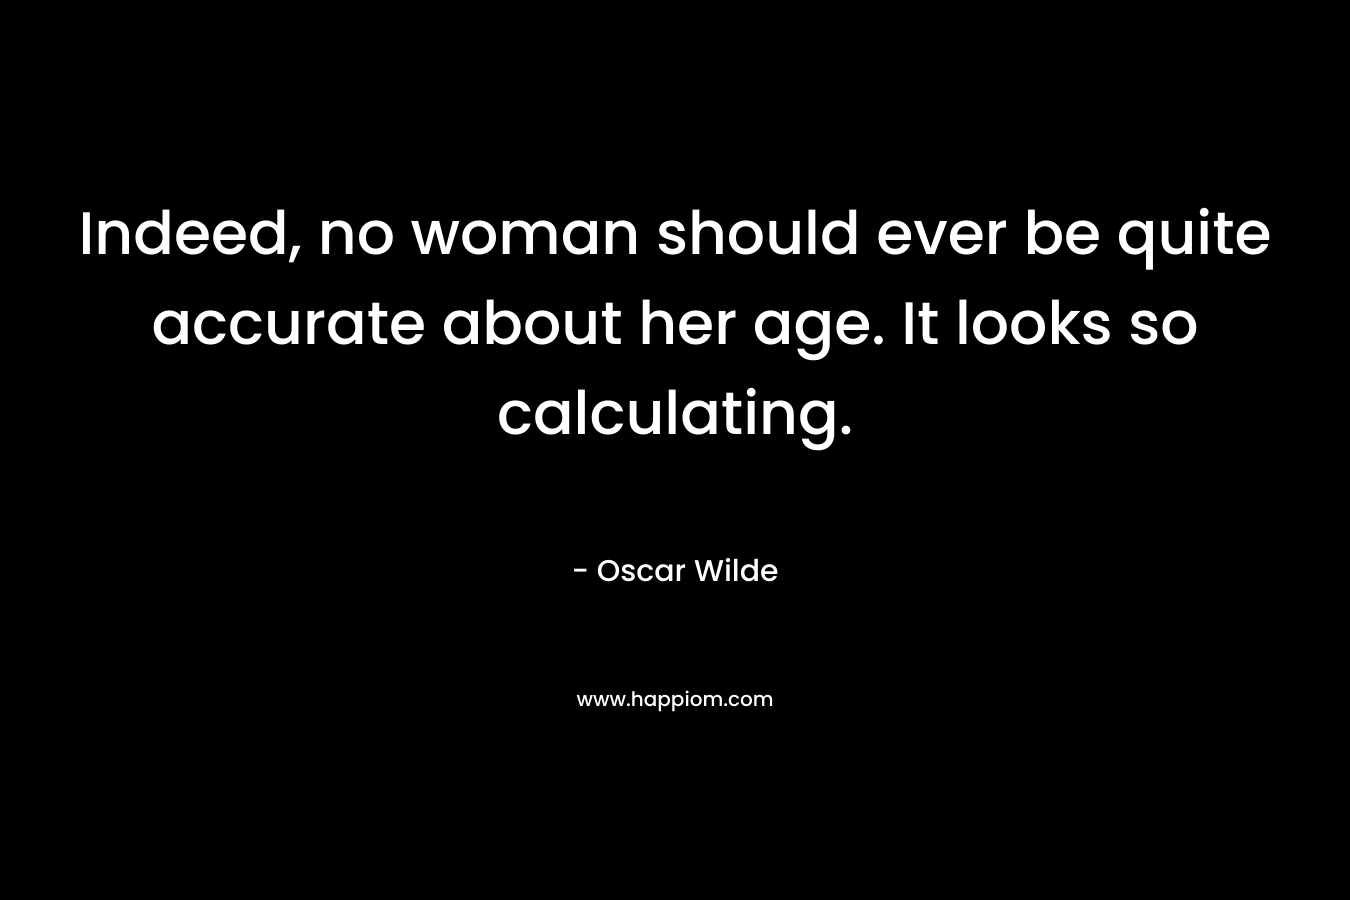 Indeed, no woman should ever be quite accurate about her age. It looks so calculating.